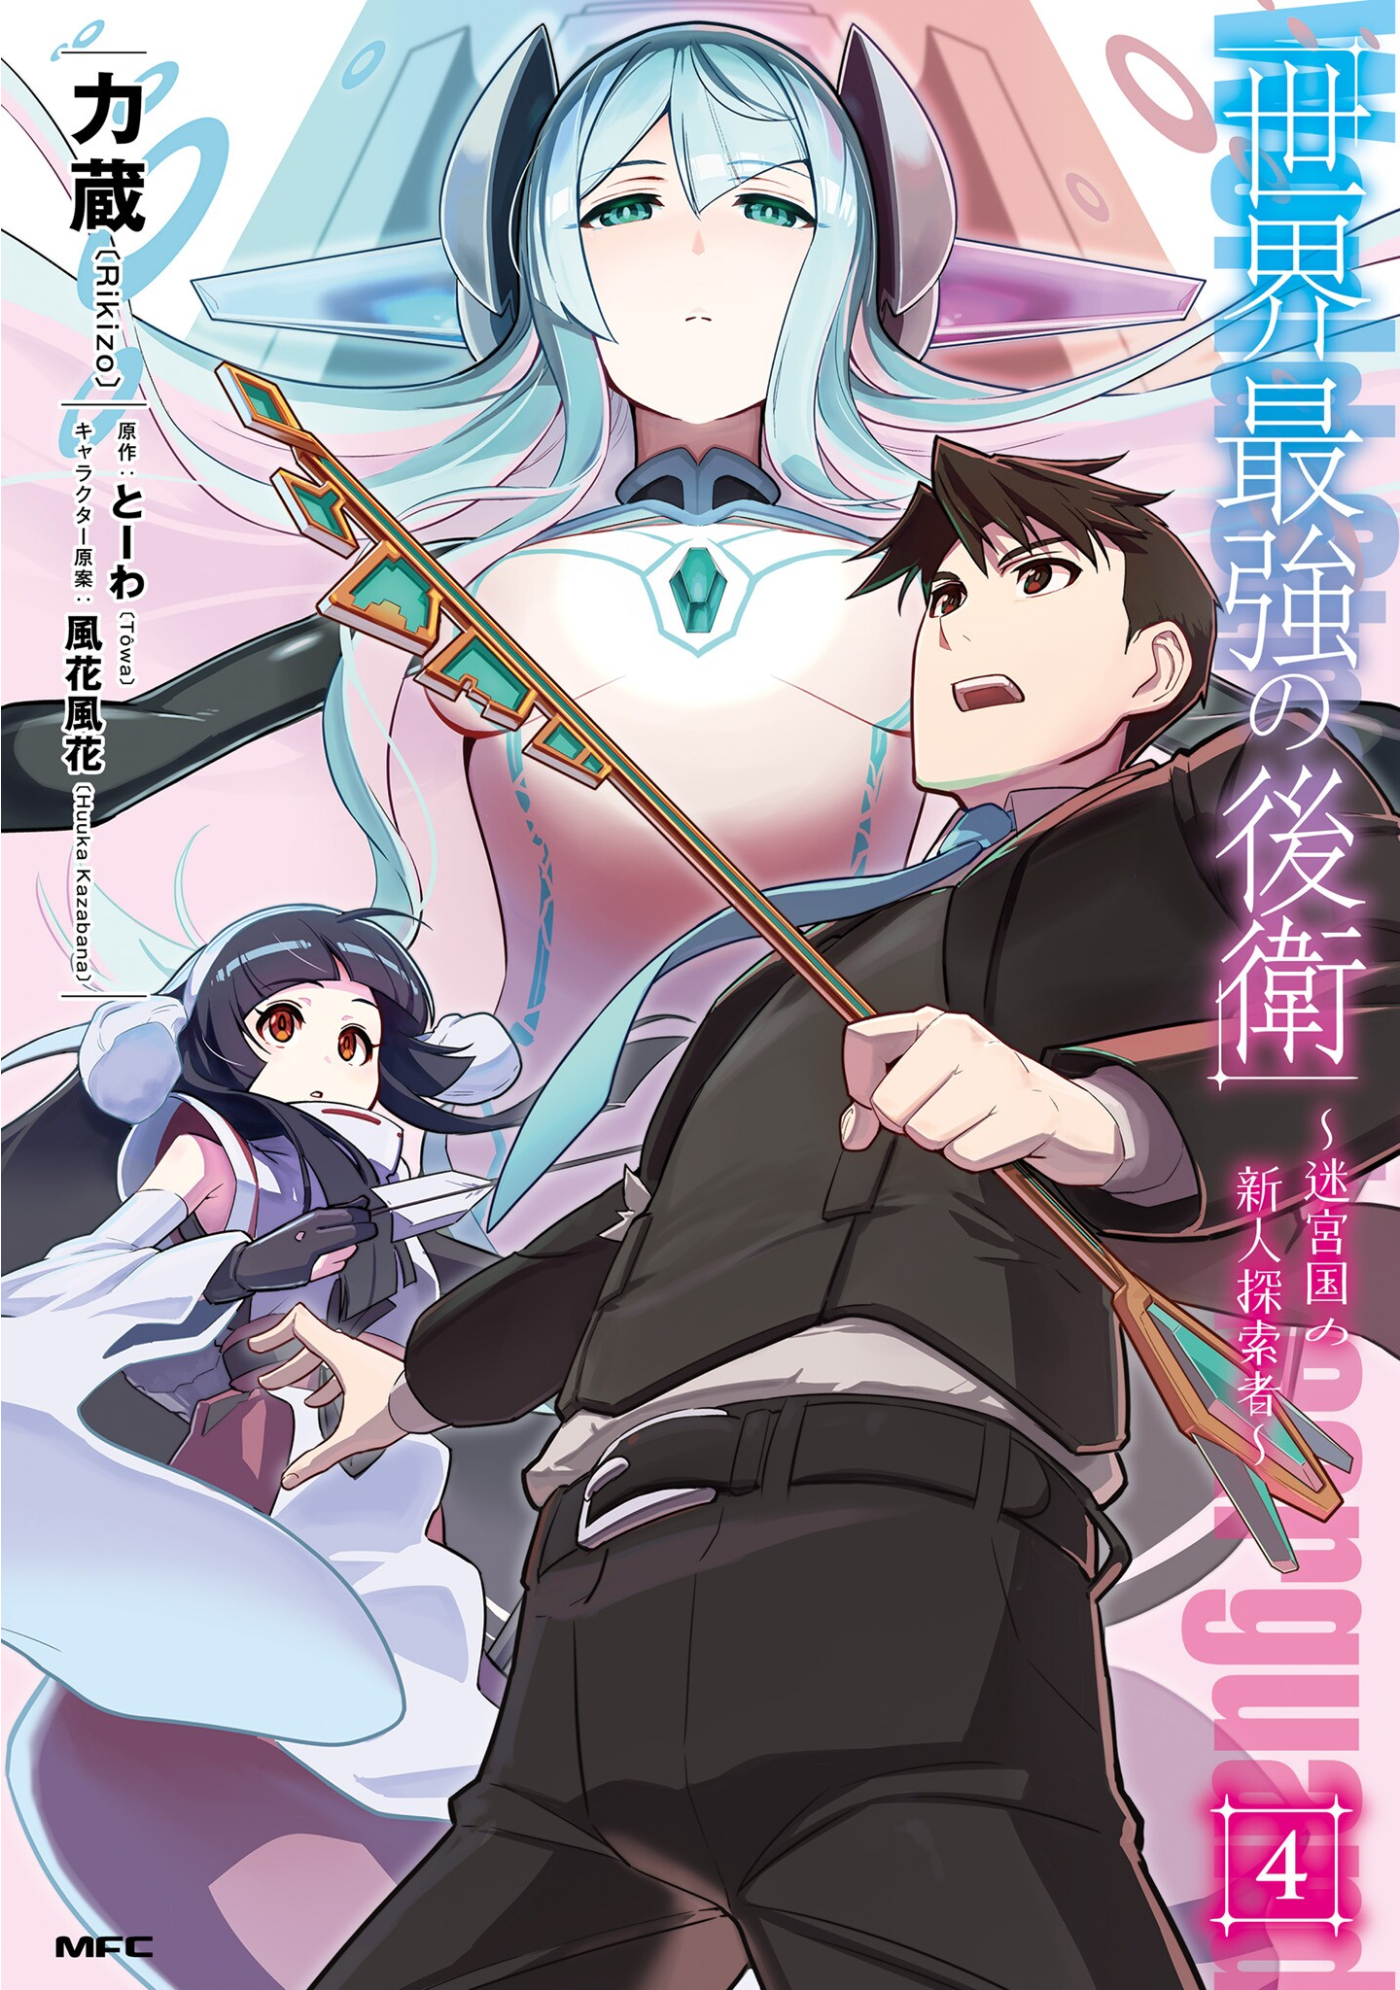 The Worlds Finest Assassin Gets Reincarnated in Another World as an  Aristocrat Manga Volume 4